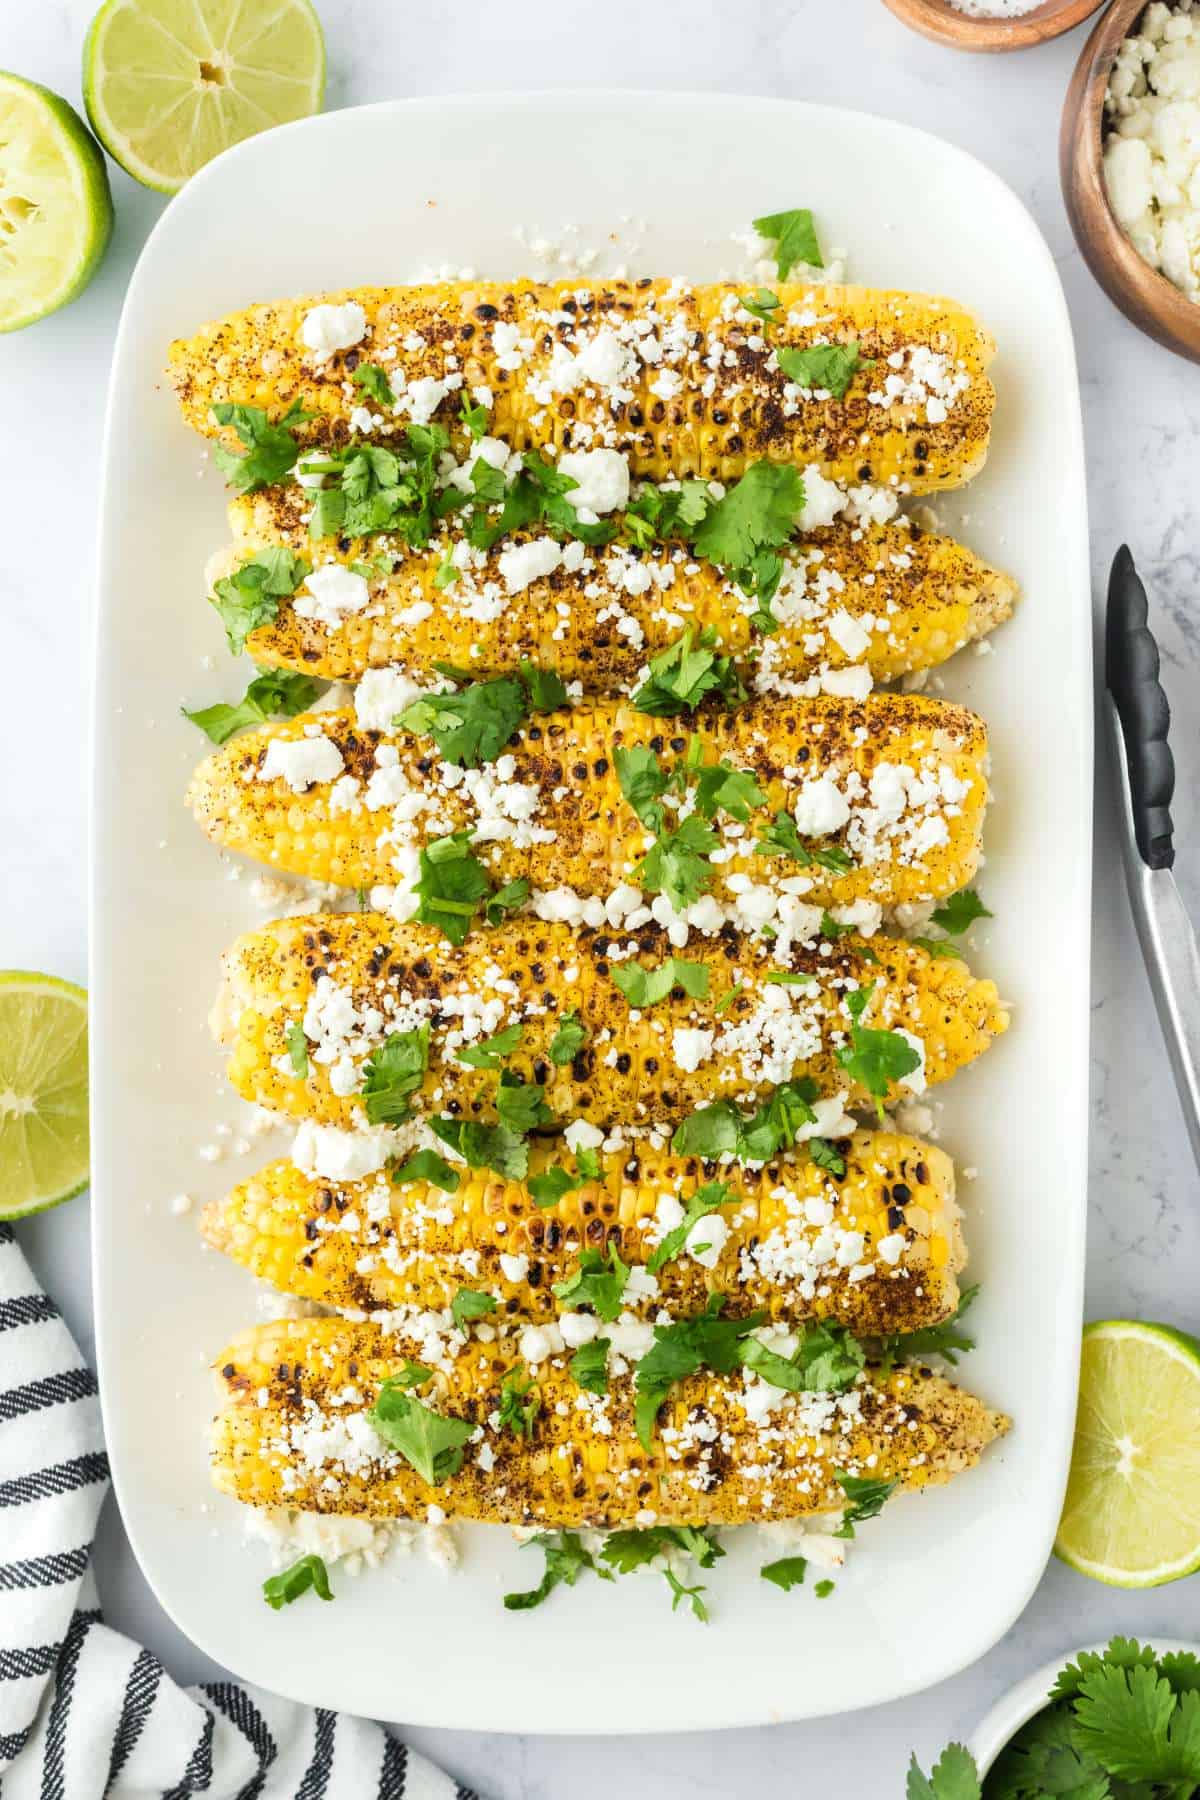 Overhead shot of Mexican corn on the cob on a white plate with limes and bowls of cheese around.